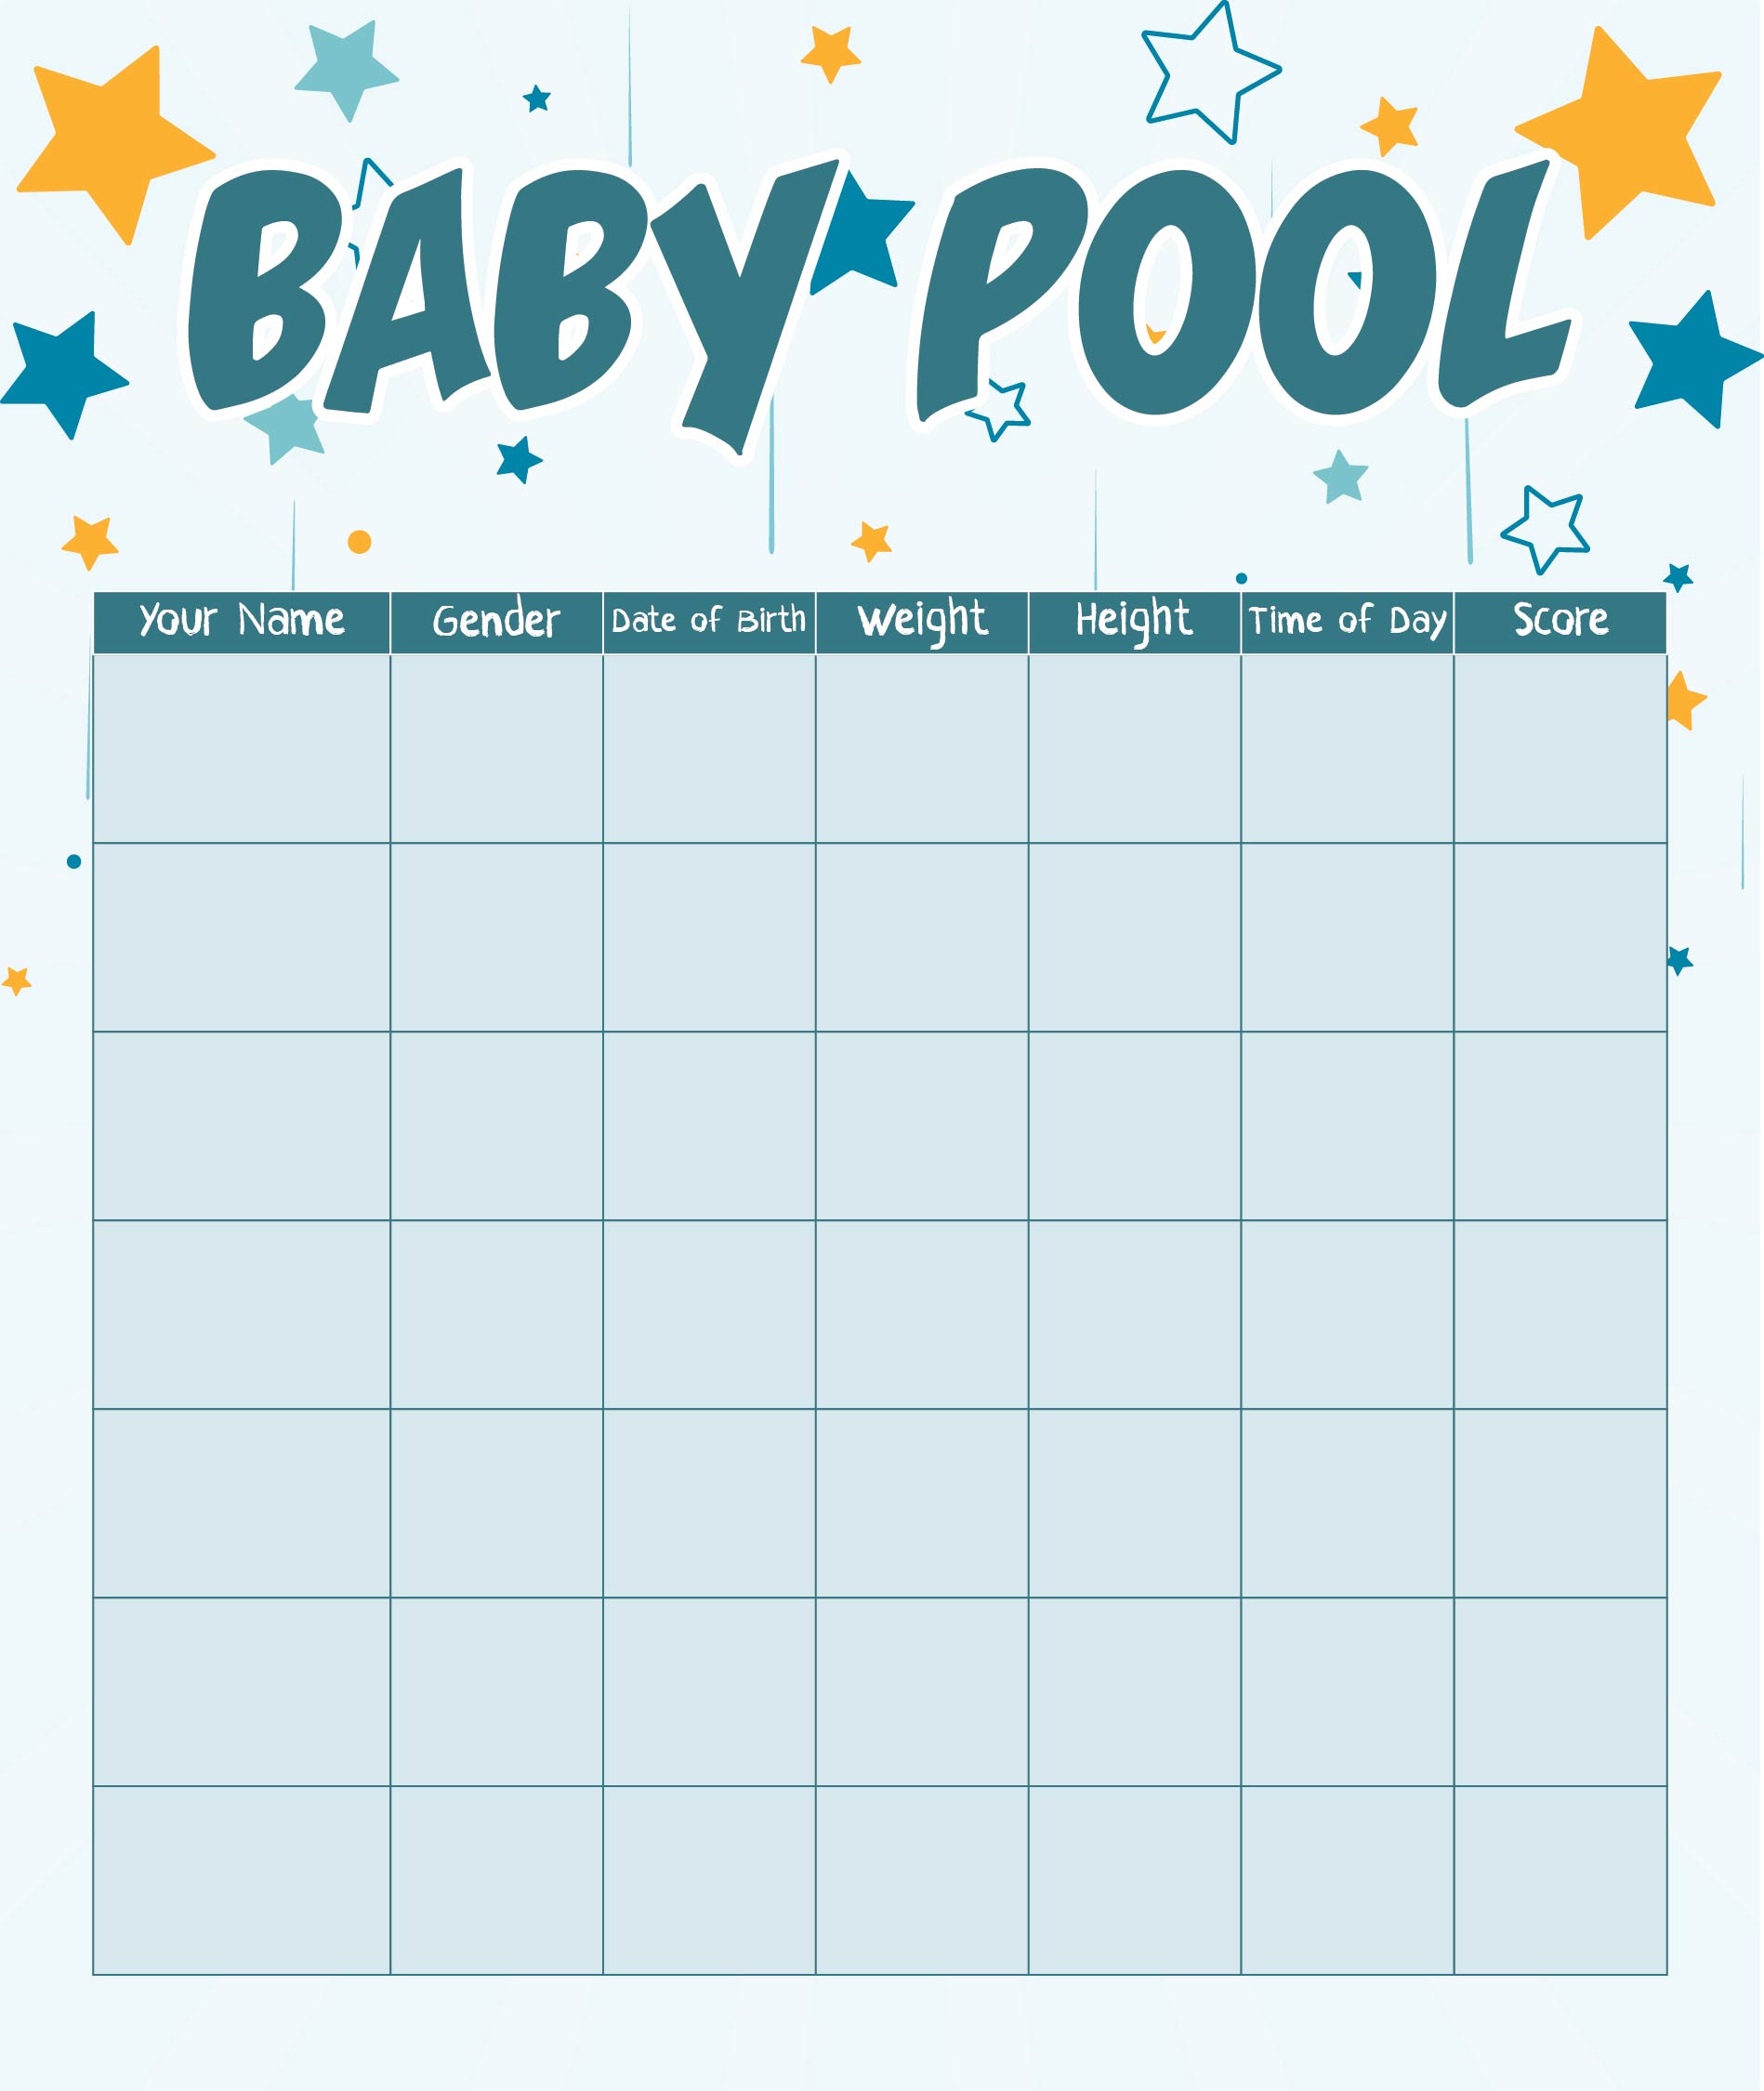 guess the date baby pool for baby shower 17